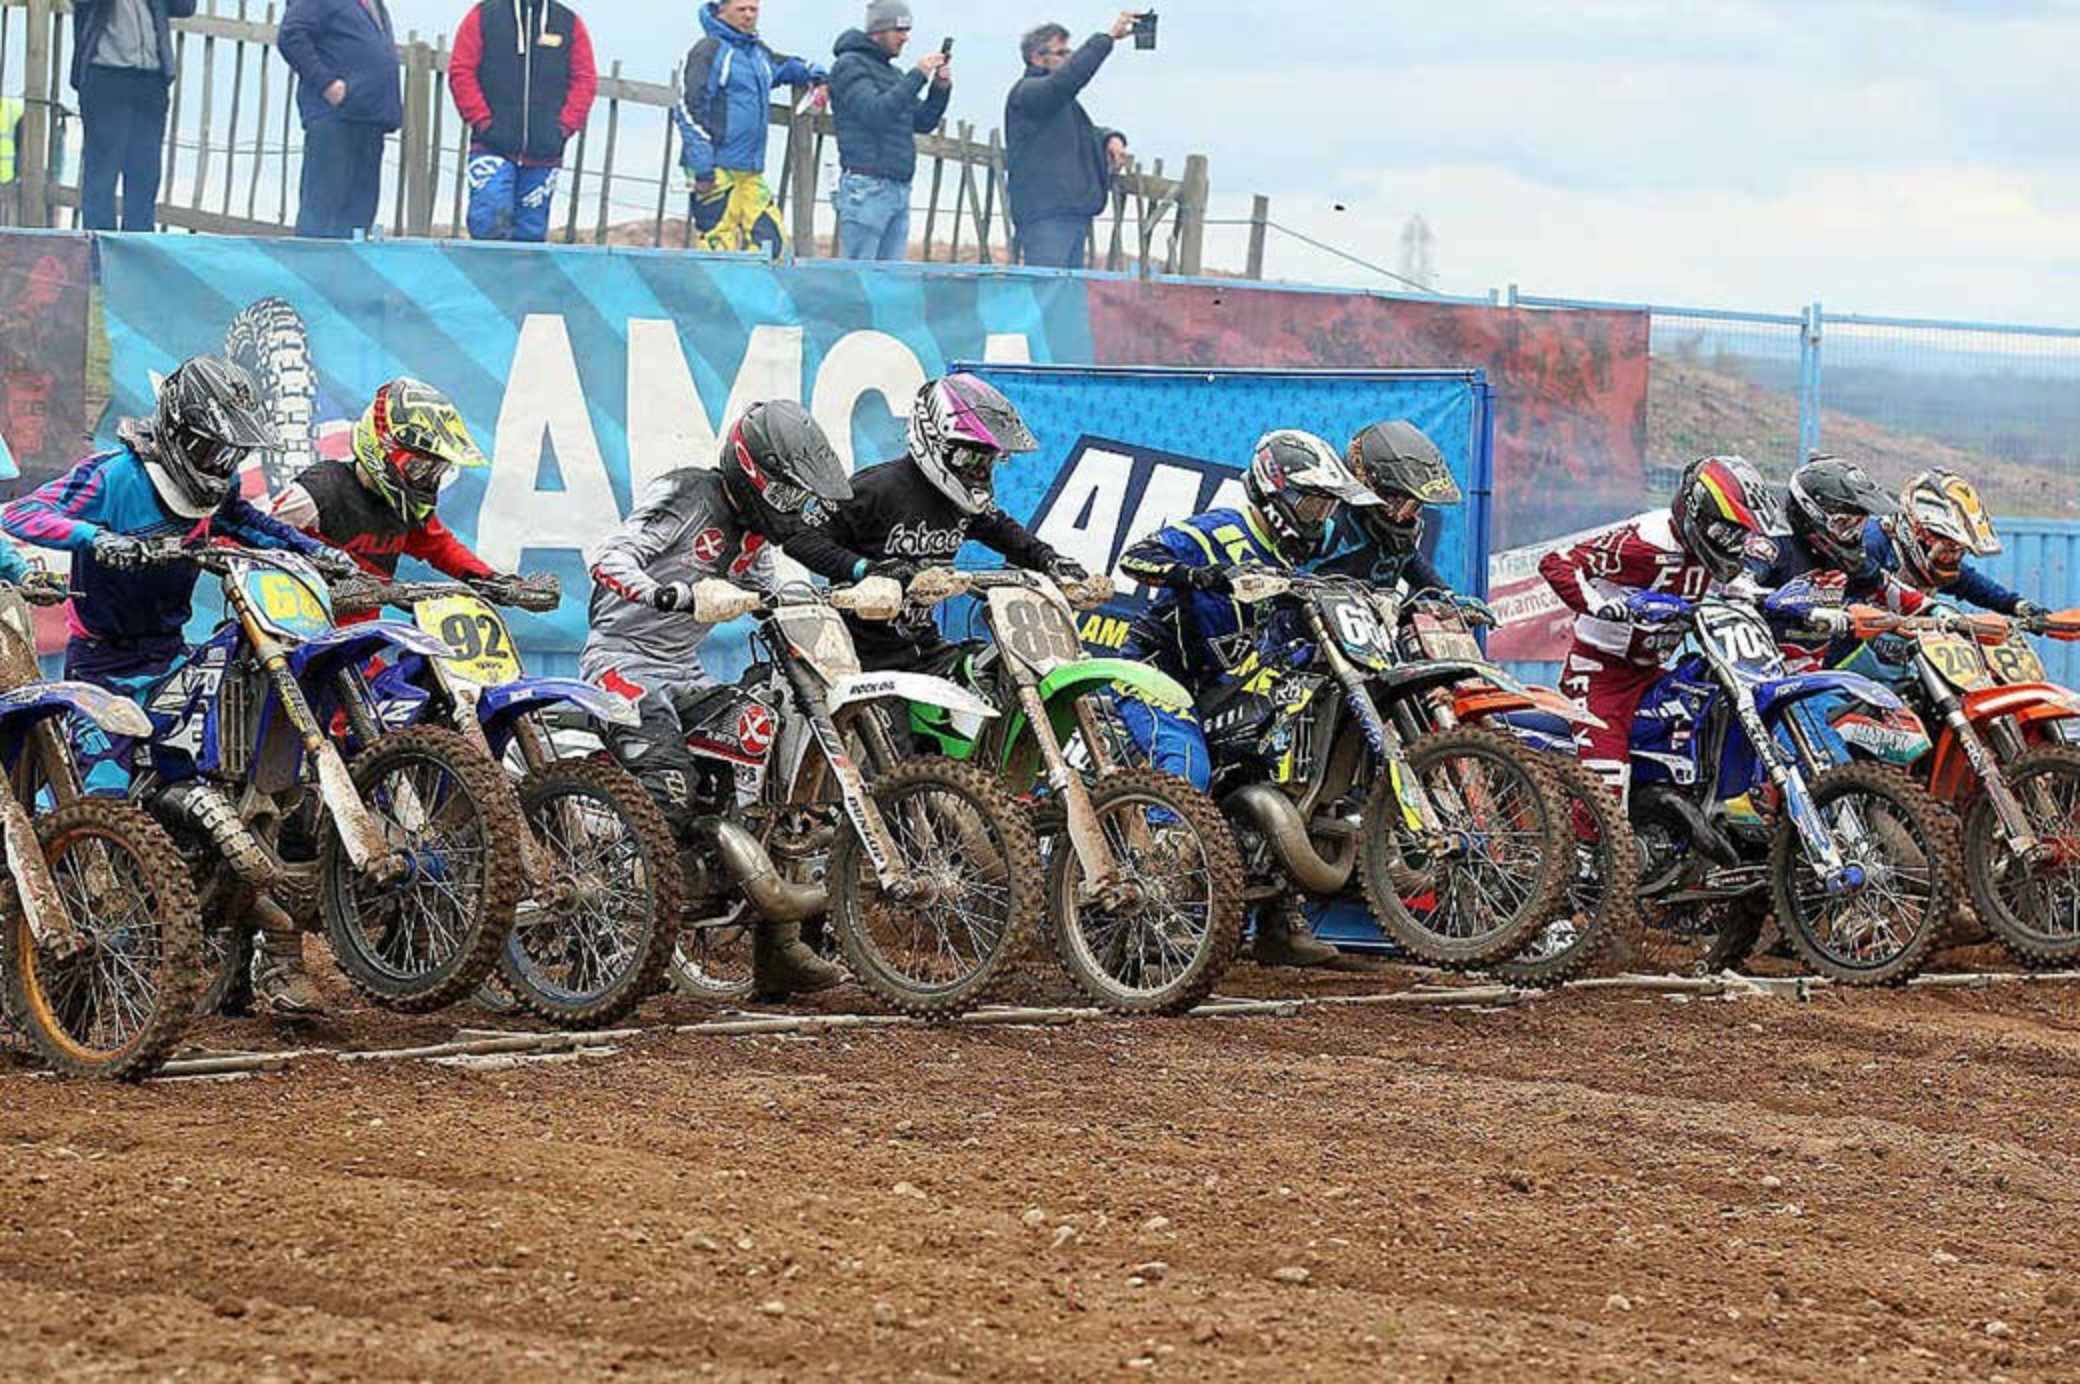 Motocross Events What's On For W/E 13th May 2018